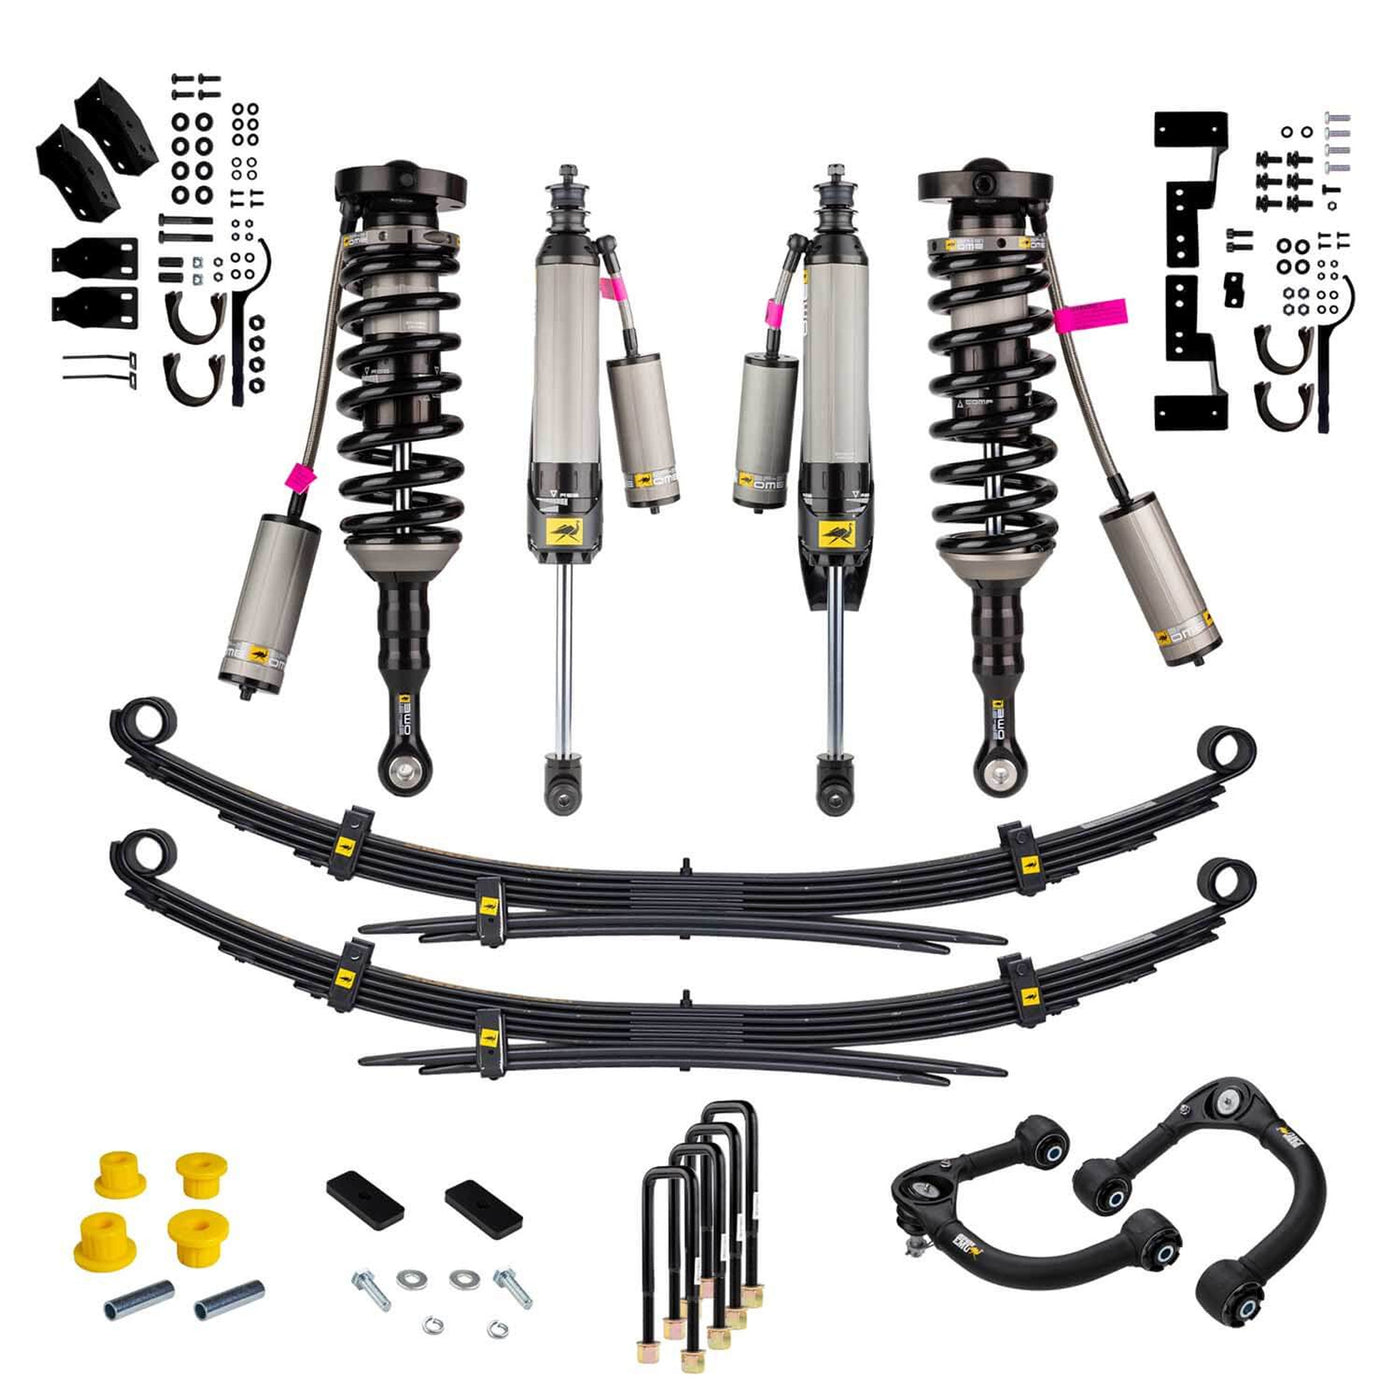 HEAVY LOAD SUSPENSION KIT WITH BP-51 SHOCKS AND UPPER CONTROL ARMS TACBP51HP